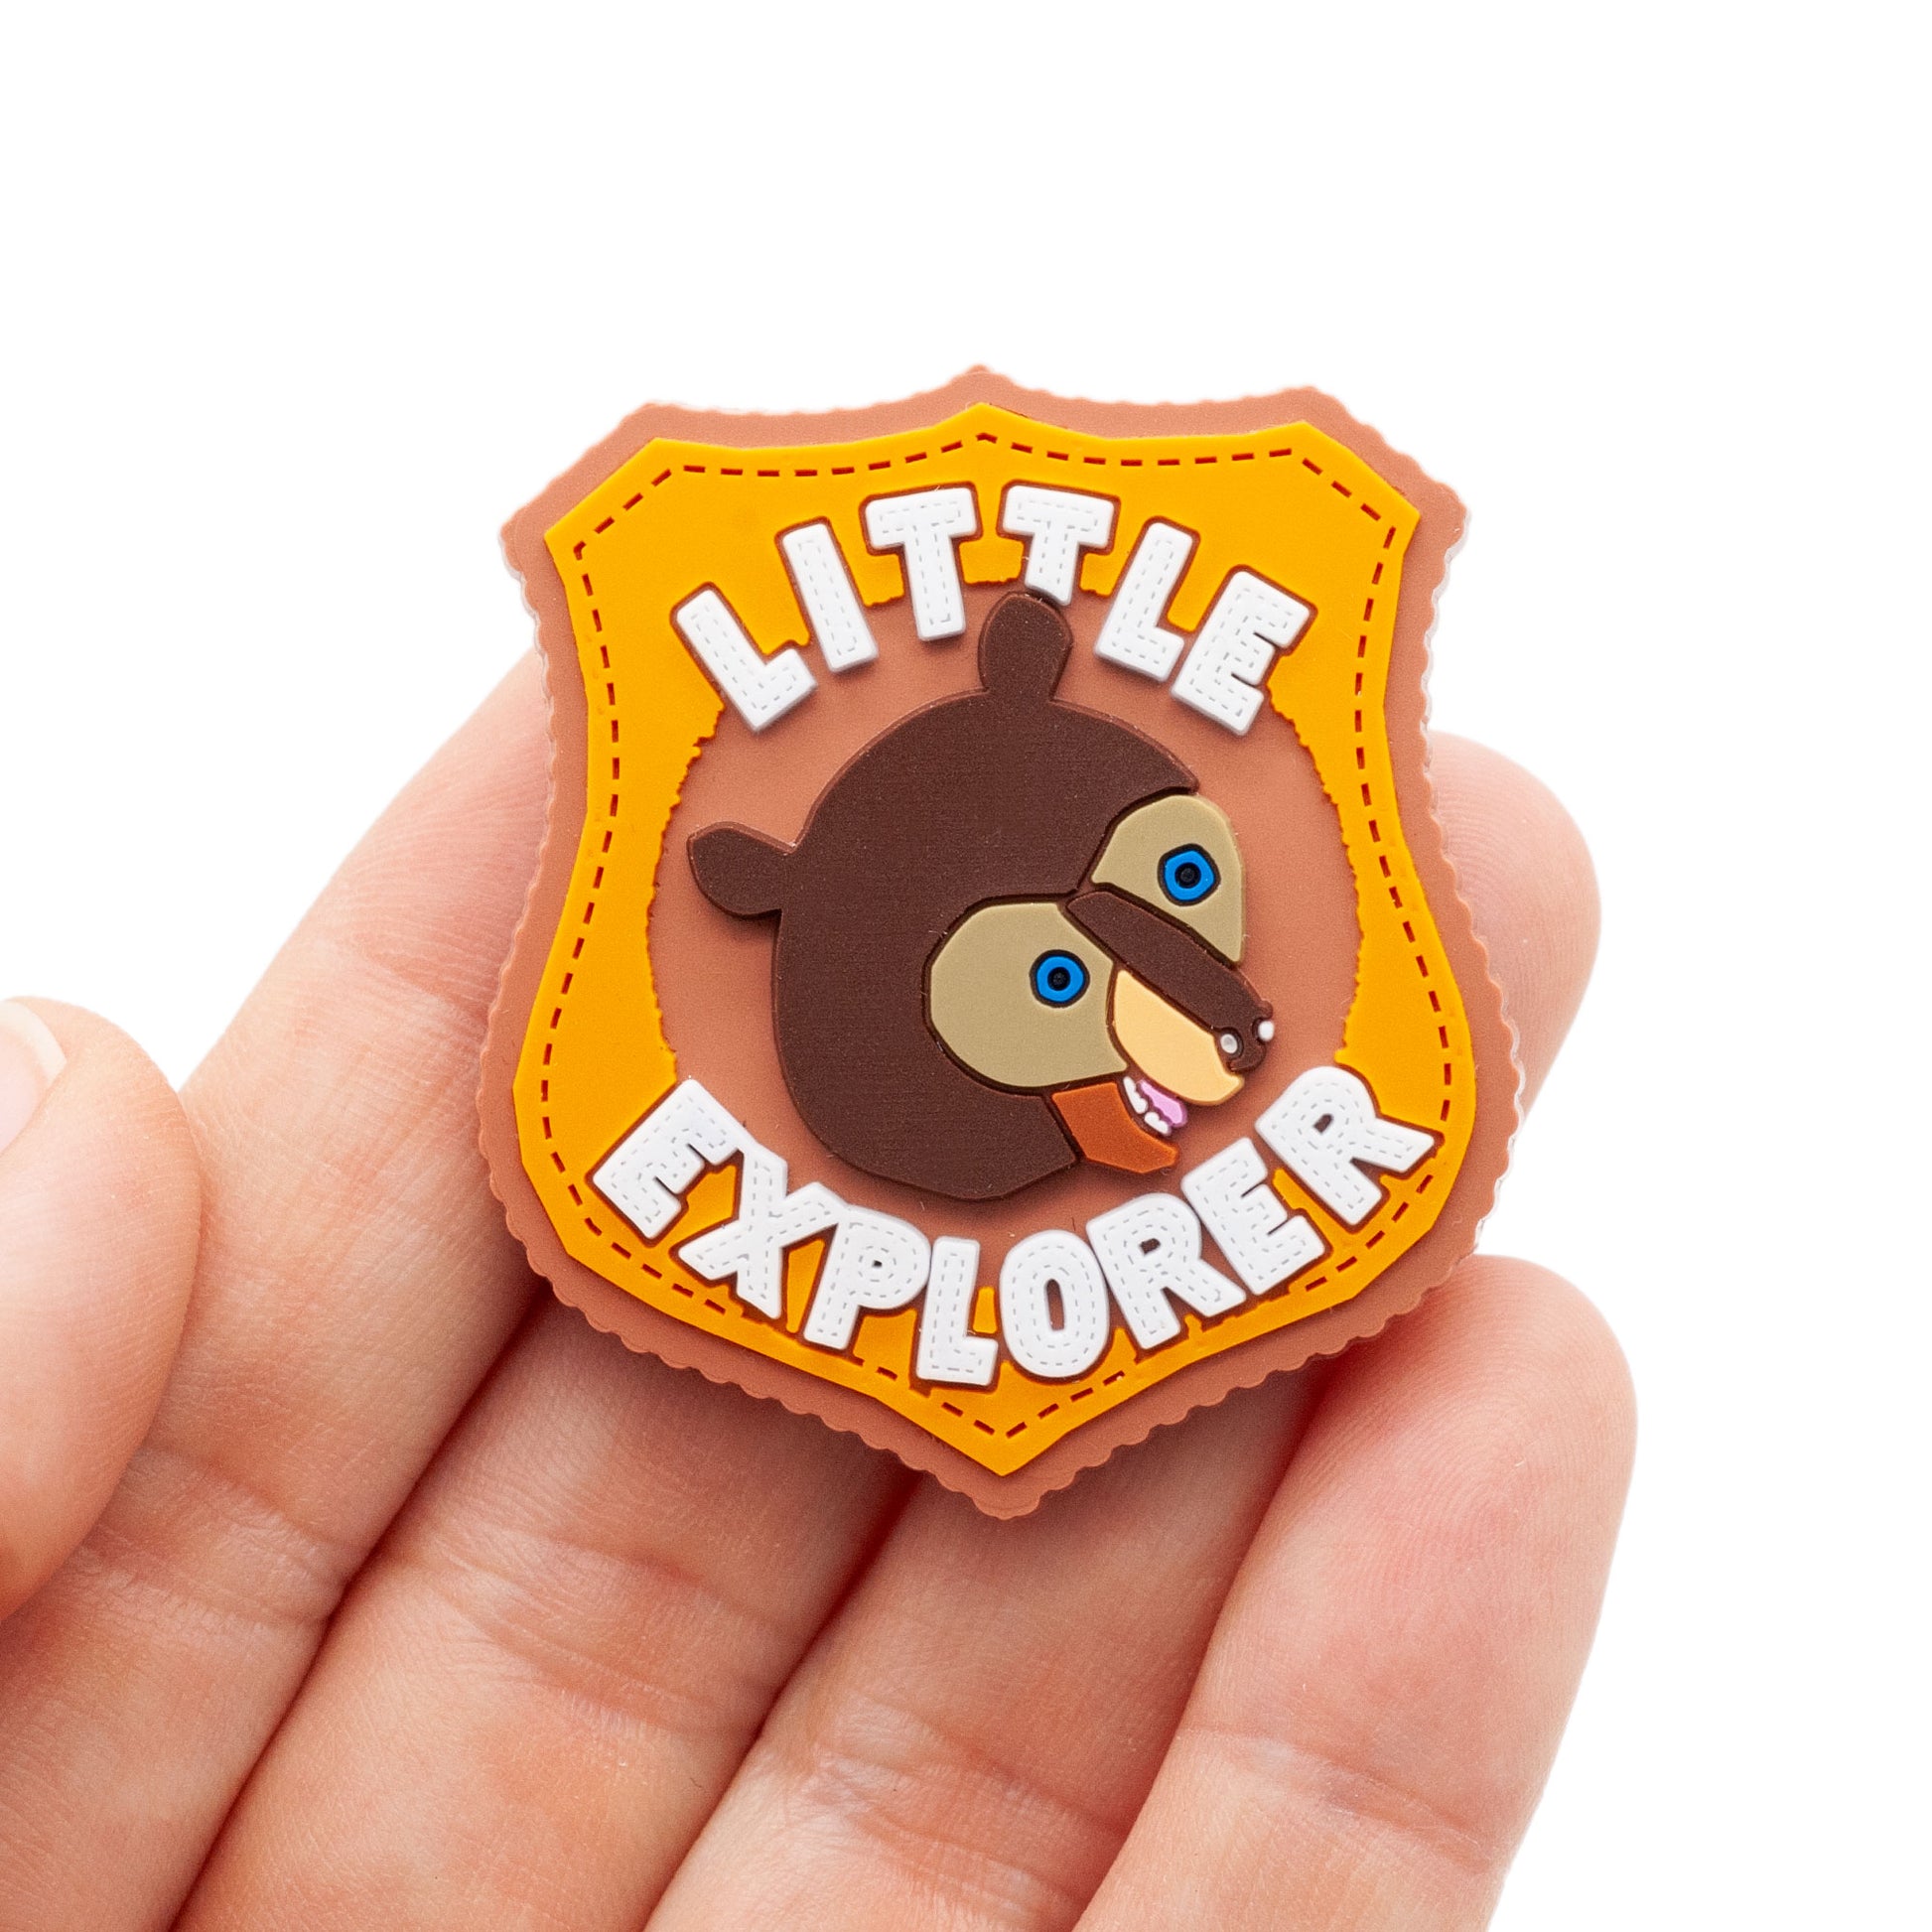 Little Explorer magnet made of soft PVC. Bown bear in the center with letter above and below bear. Colors include light brown, orange , dark brown, blue eyes, and white lettering. Lettering says "little explorer".